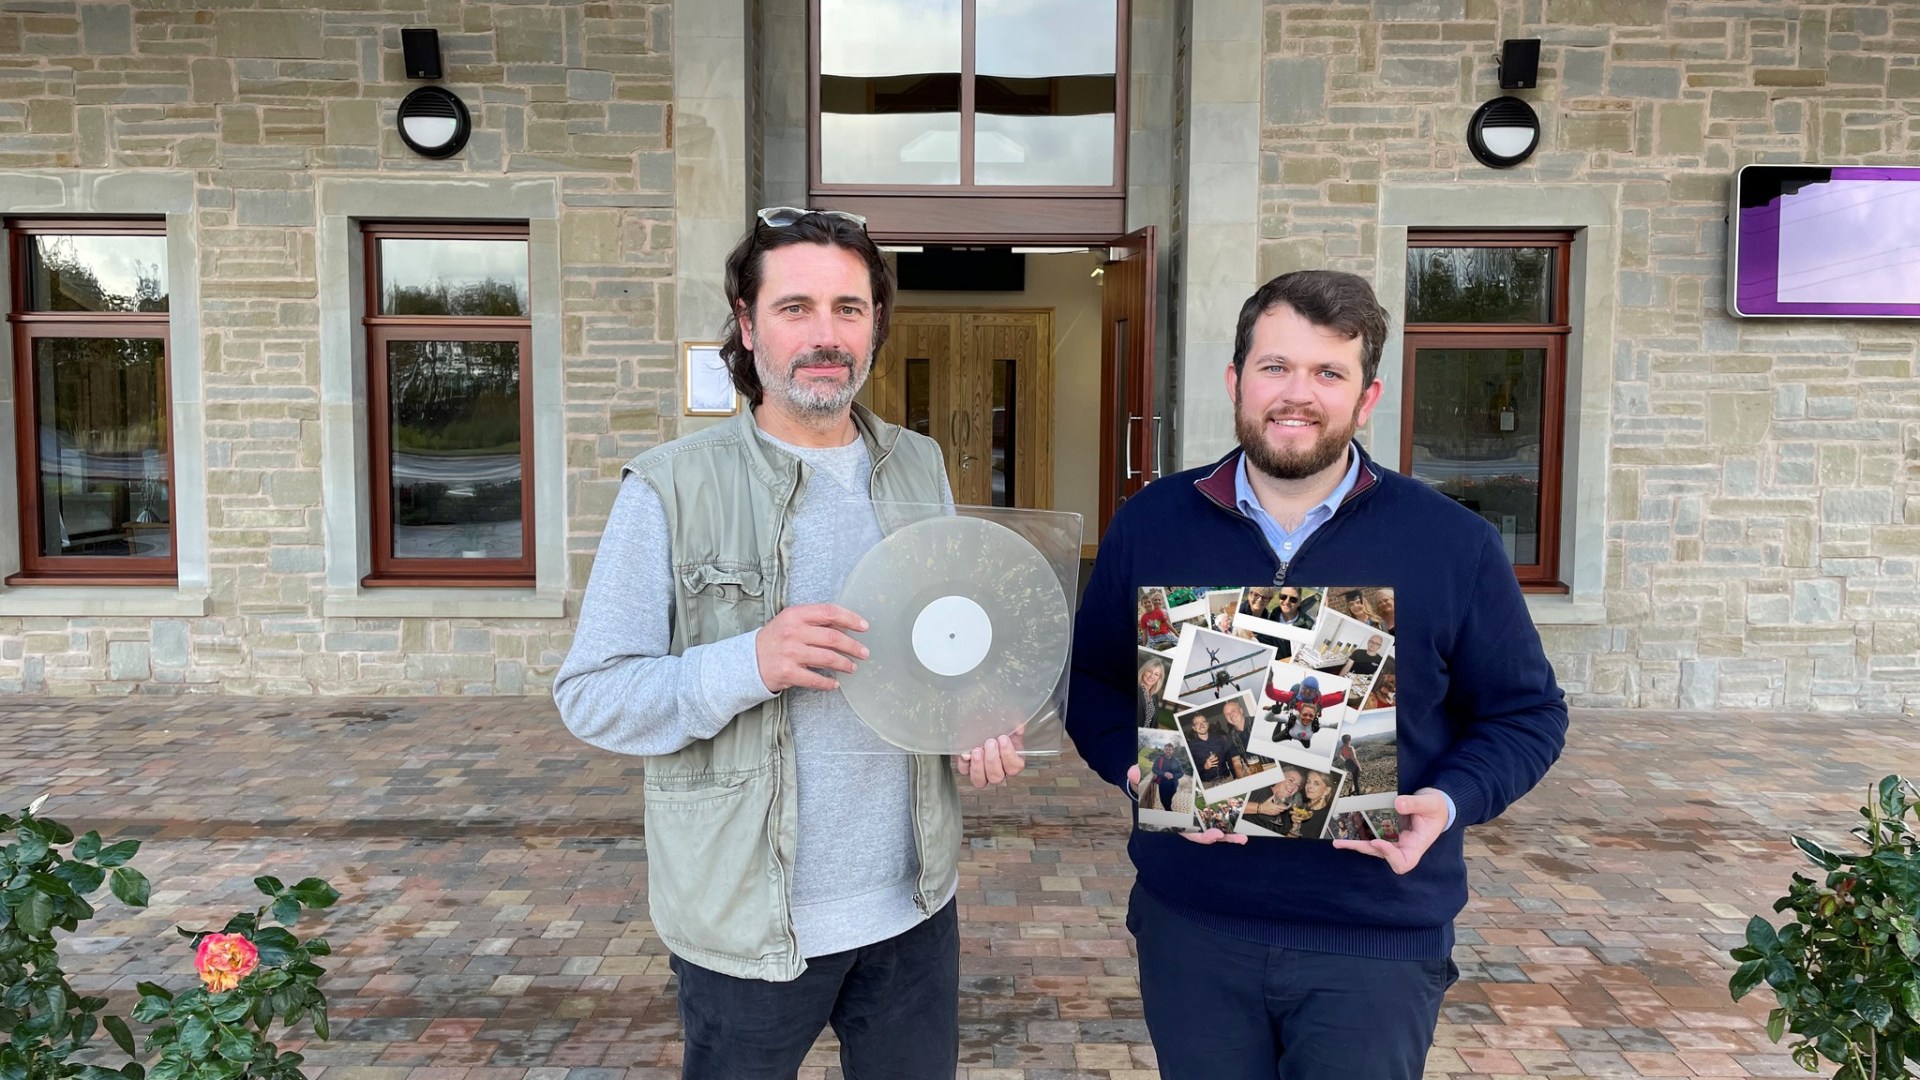 Revolutionize the Afterlife: Music-Loving Undertakers Turn Ashes into Vinyl Records, Giving the Dead a Voice Beyond the Grave